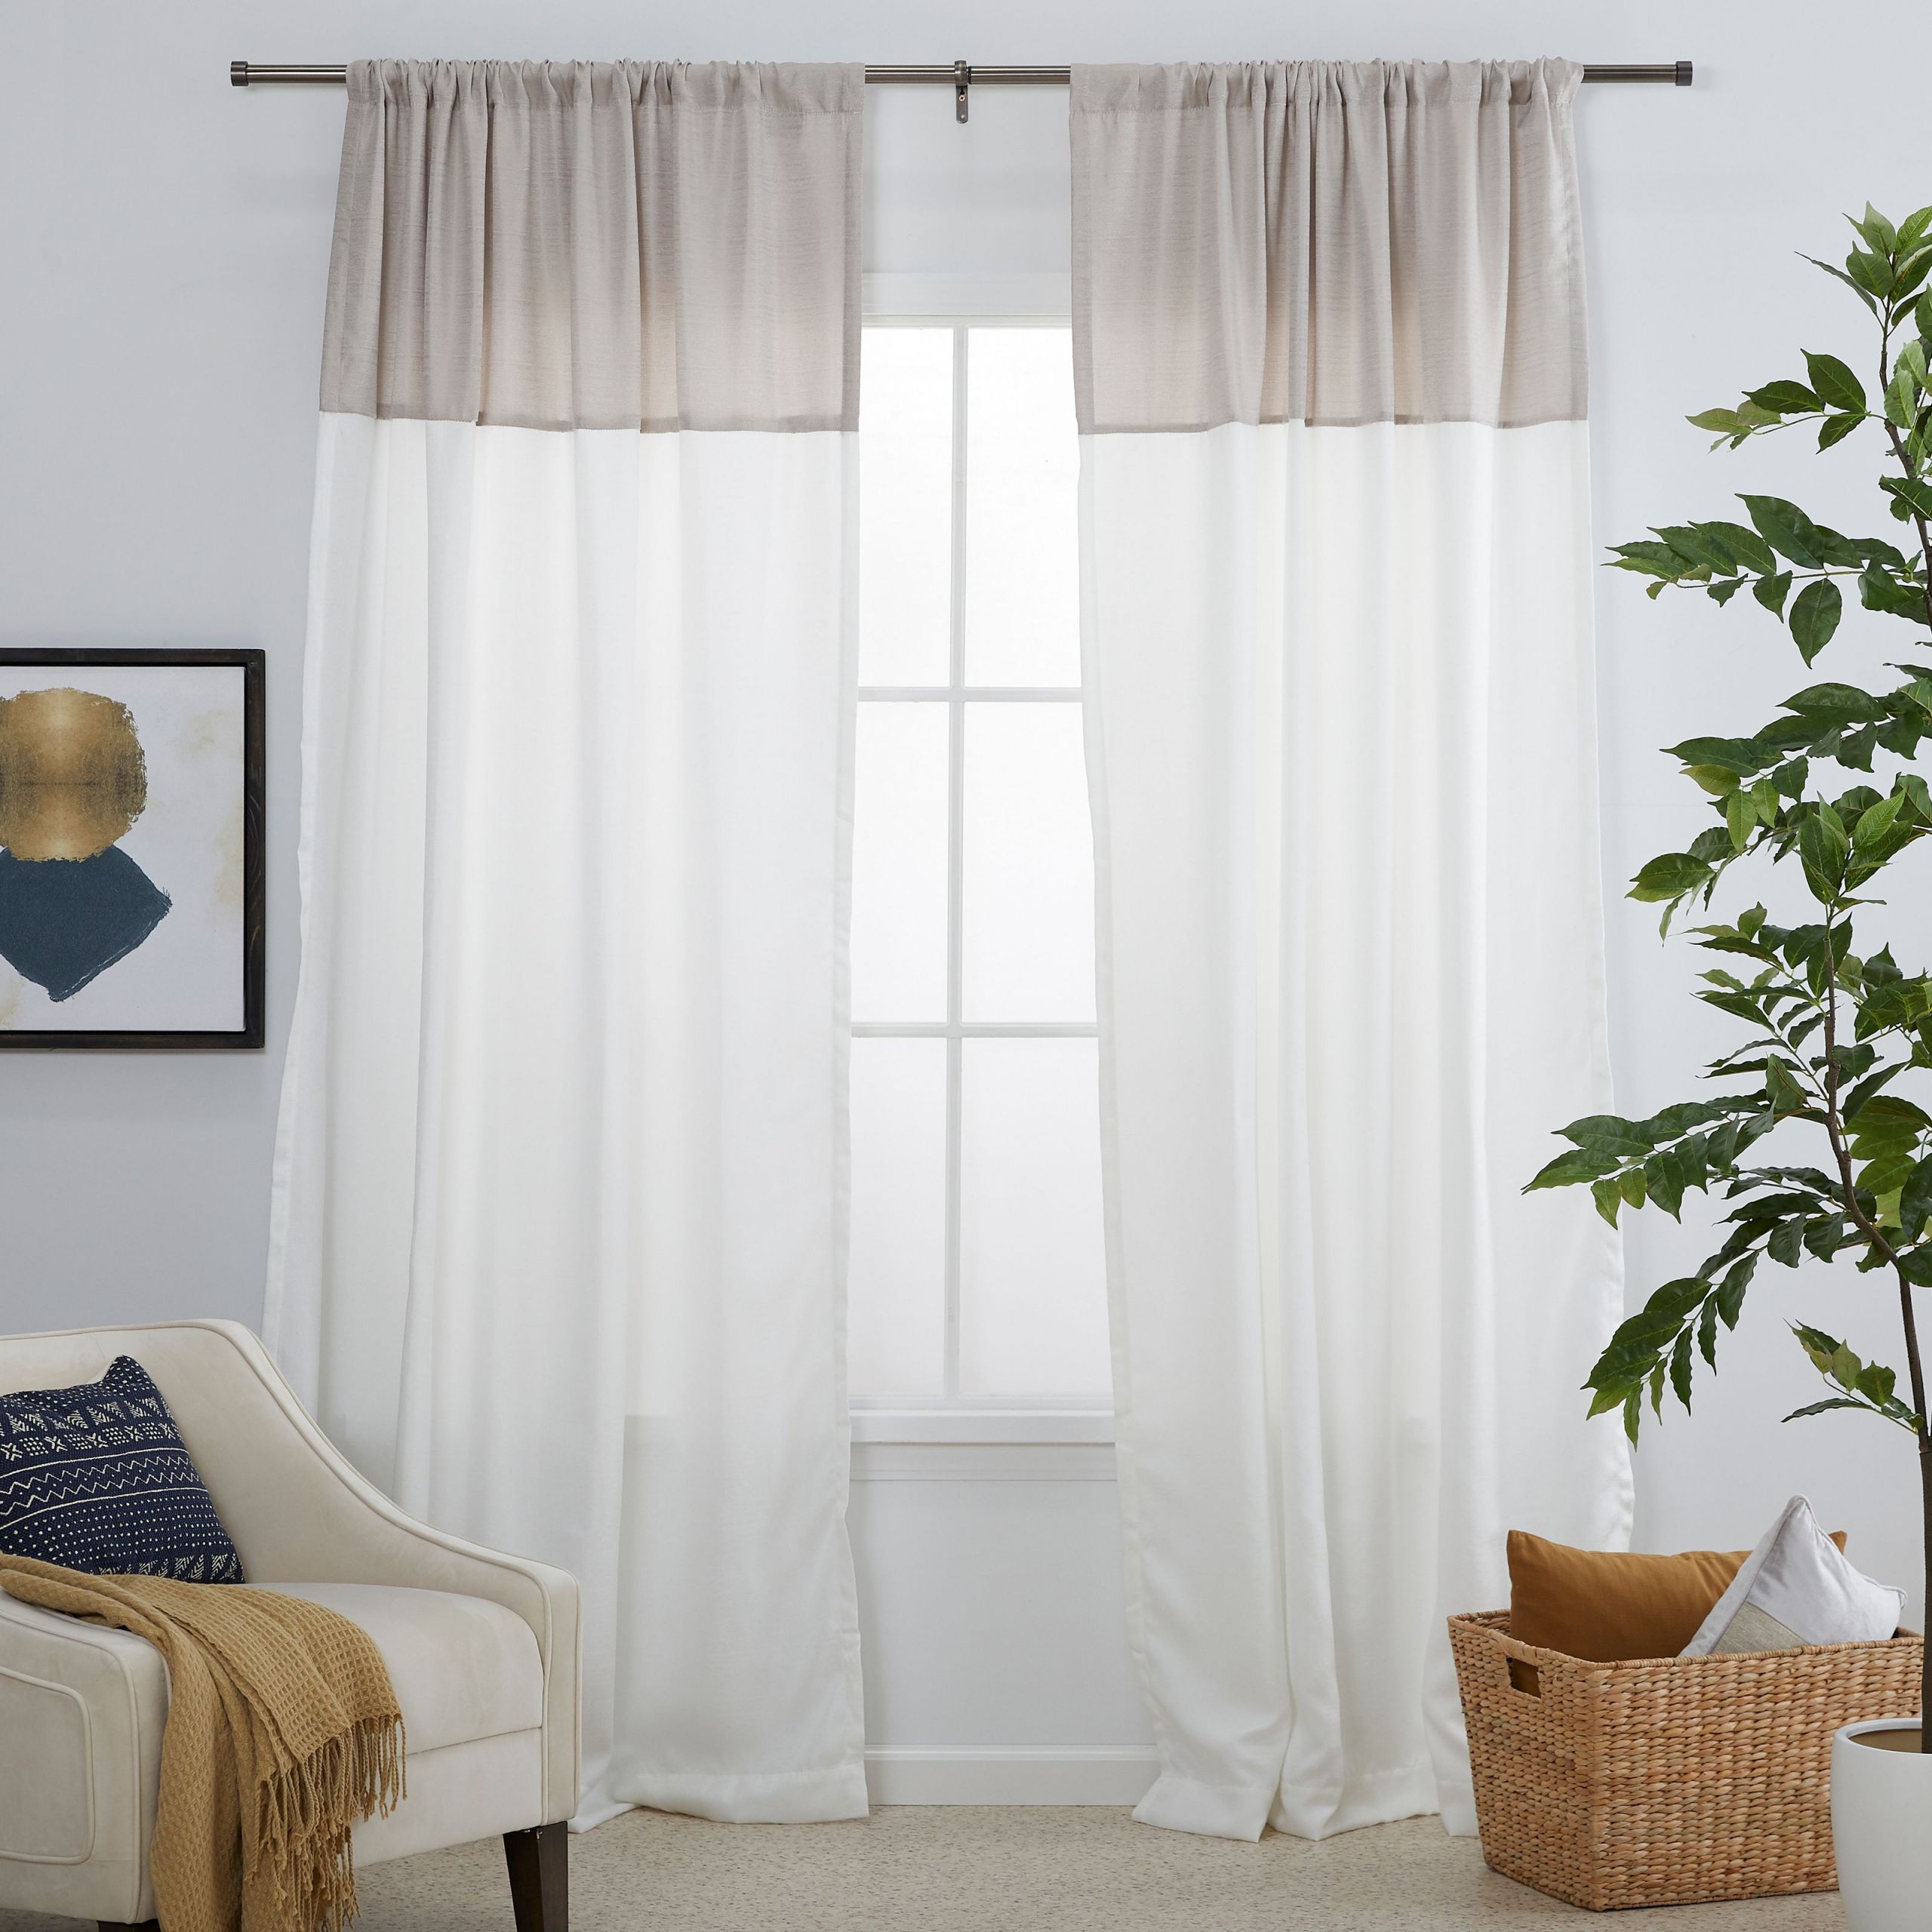 Walmart Curtains For Living Room
 Home in 2020 With images